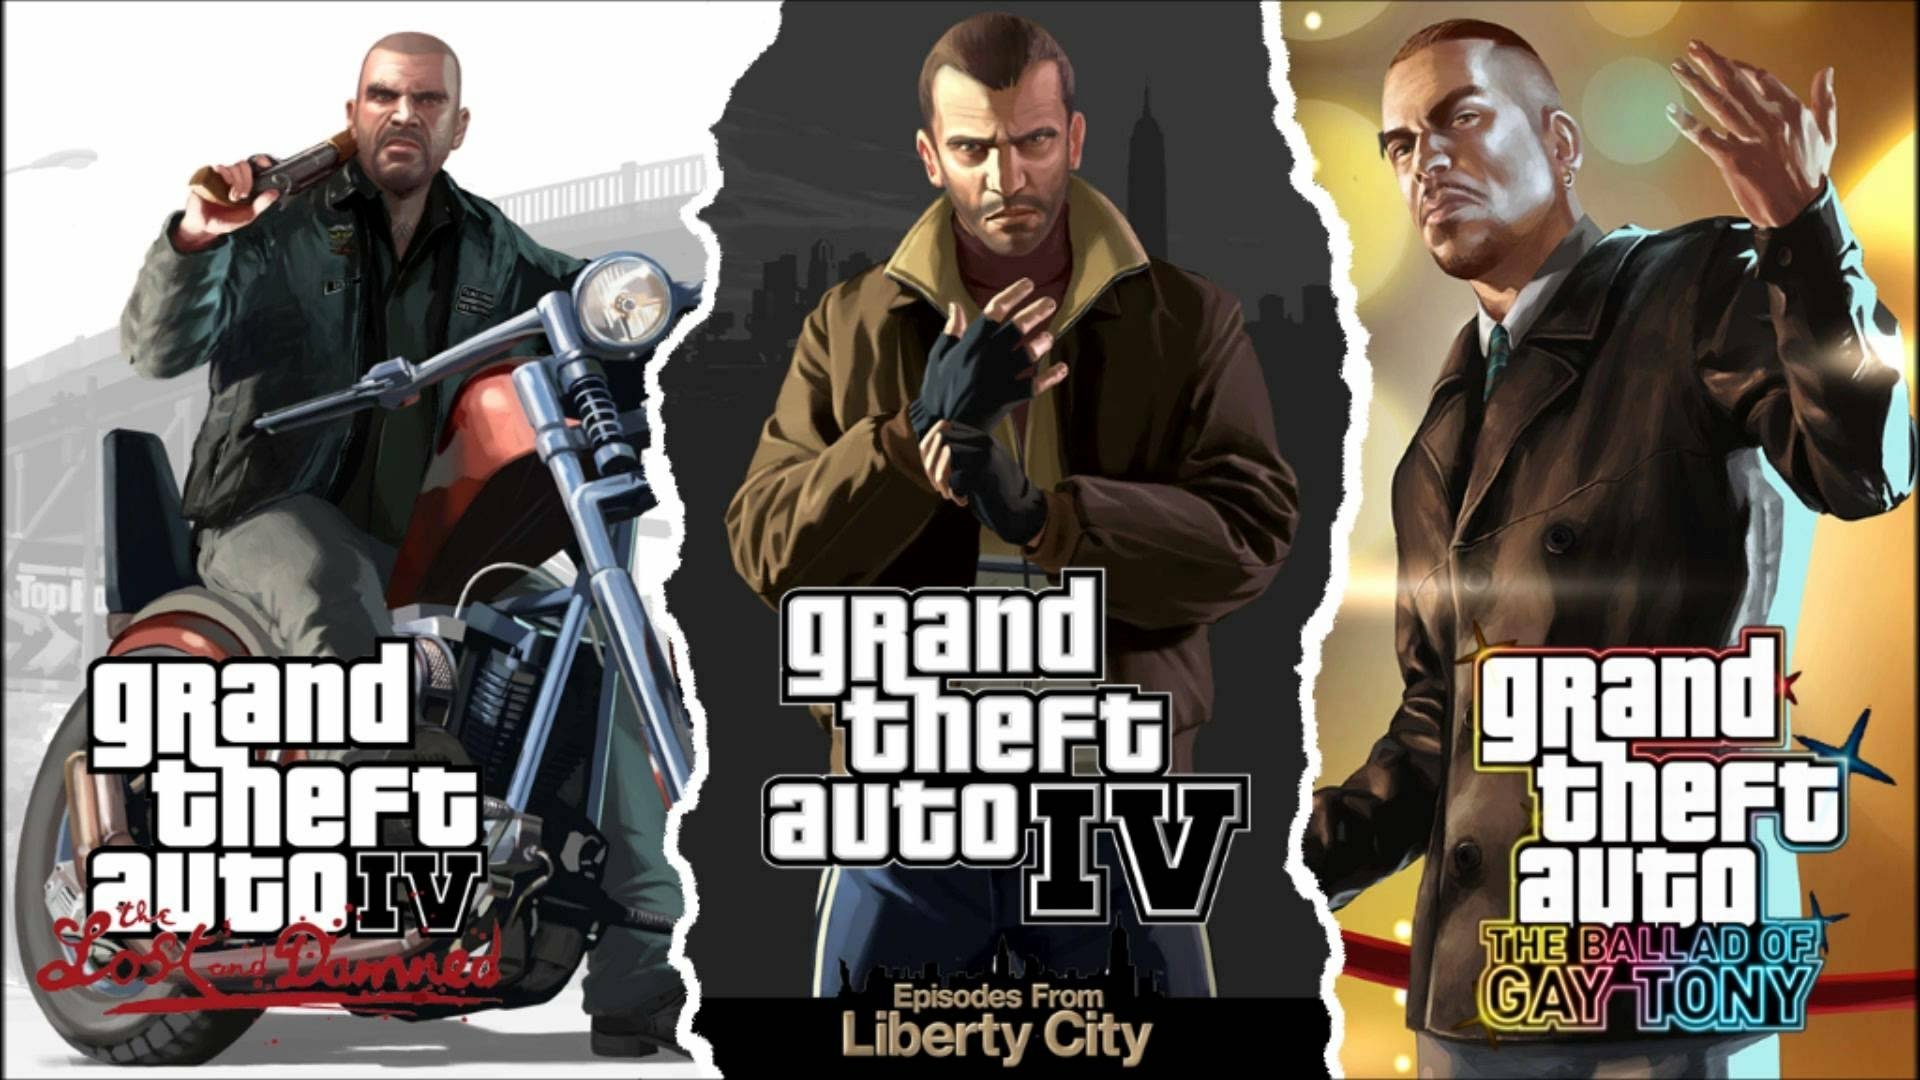 44 Grand Theft Auto Iv Hd Wallpapers Background Images Images, Photos, Reviews